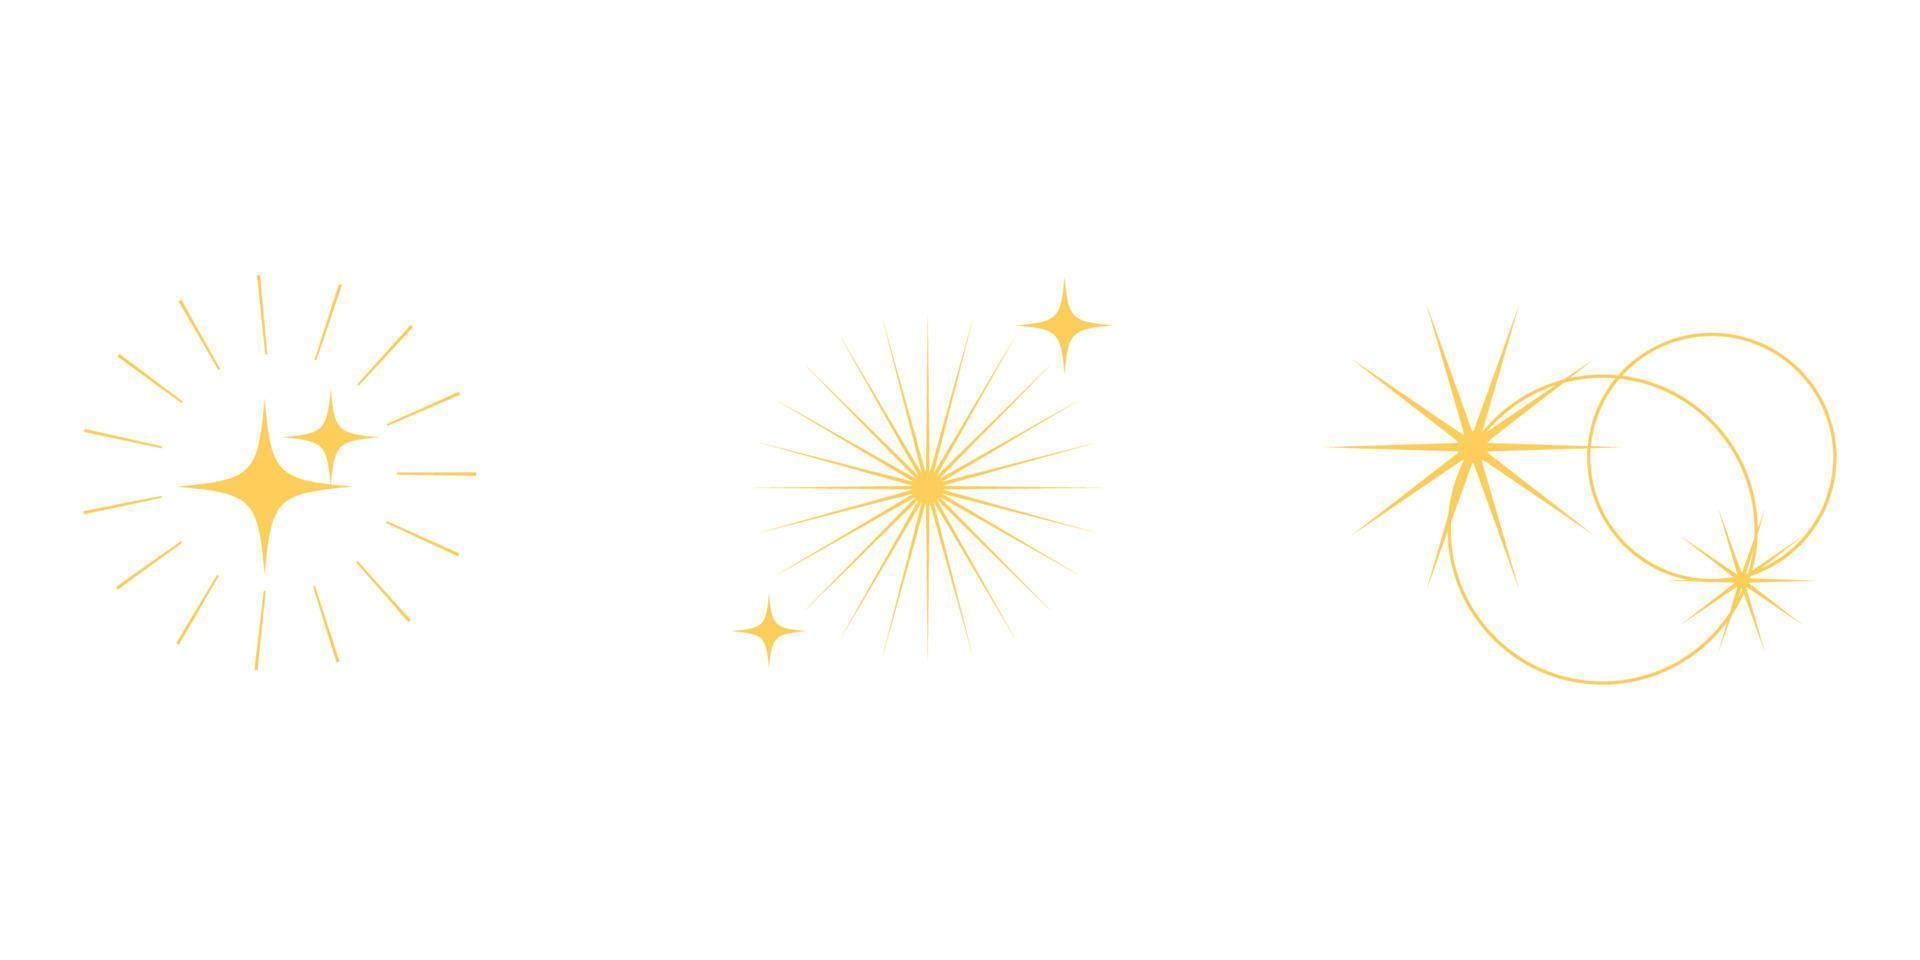 Set of sparking star. Icon and symbol. Starry vector illustration isolated on white background